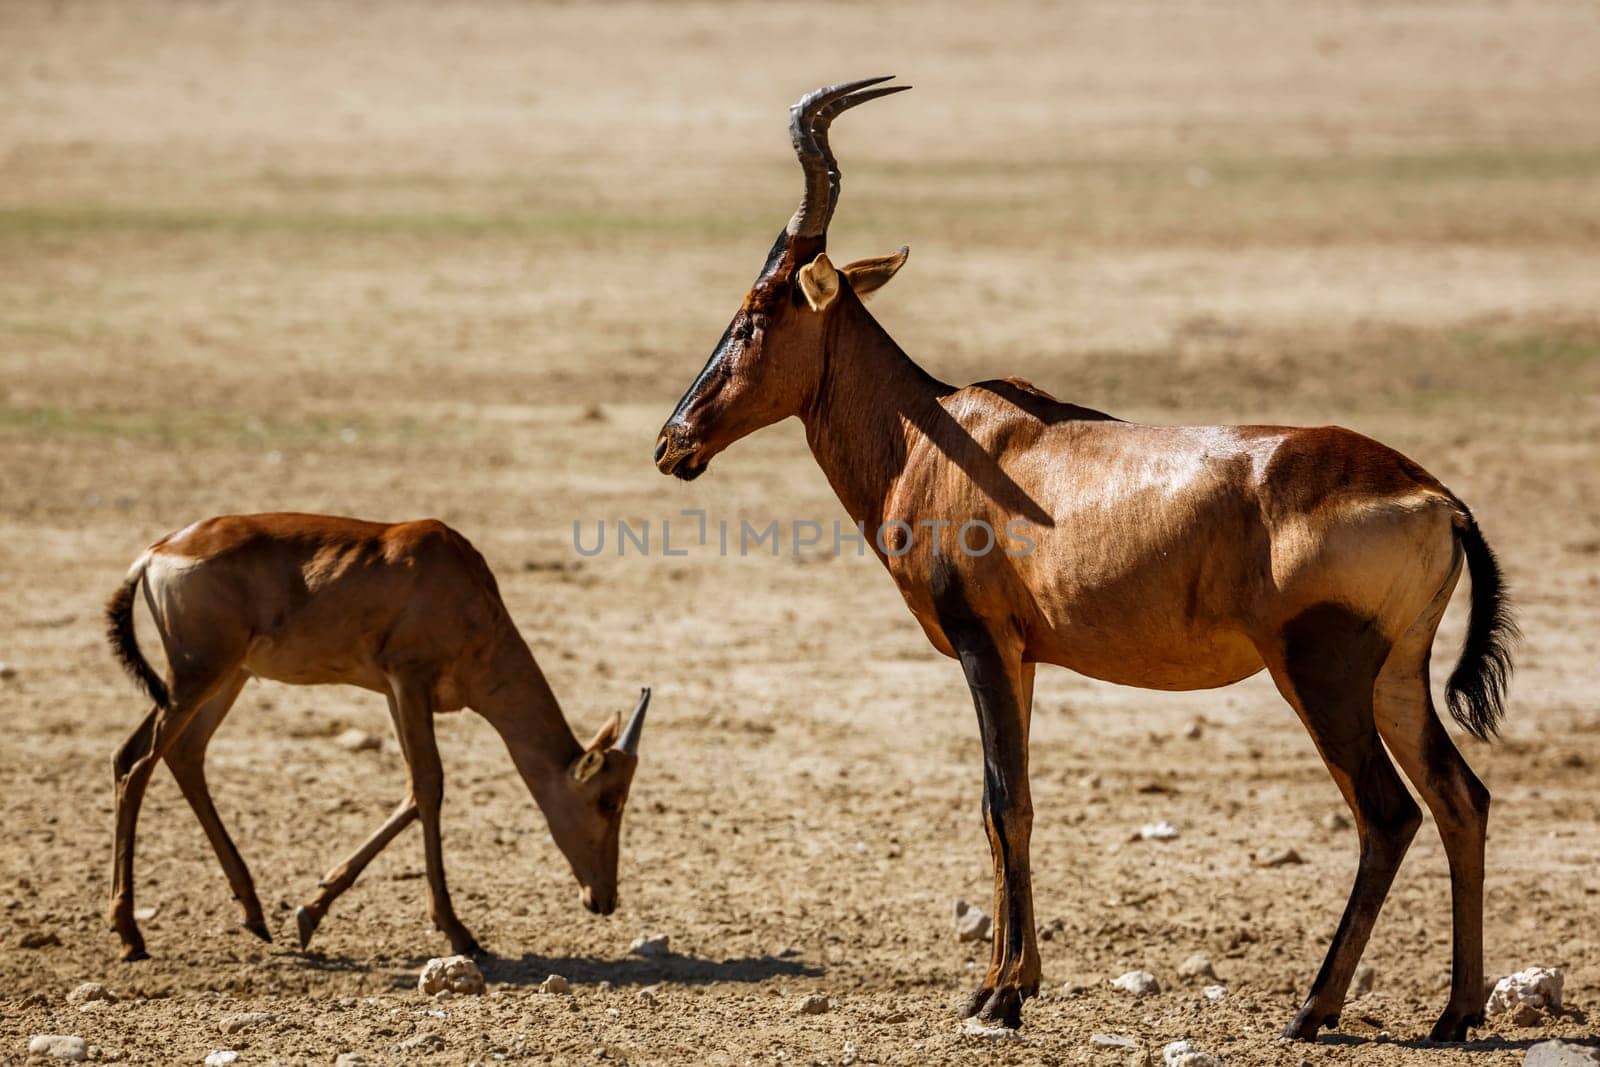 Red hartebeest in Kgalagadi transfrontier park, South Africa by PACOCOMO